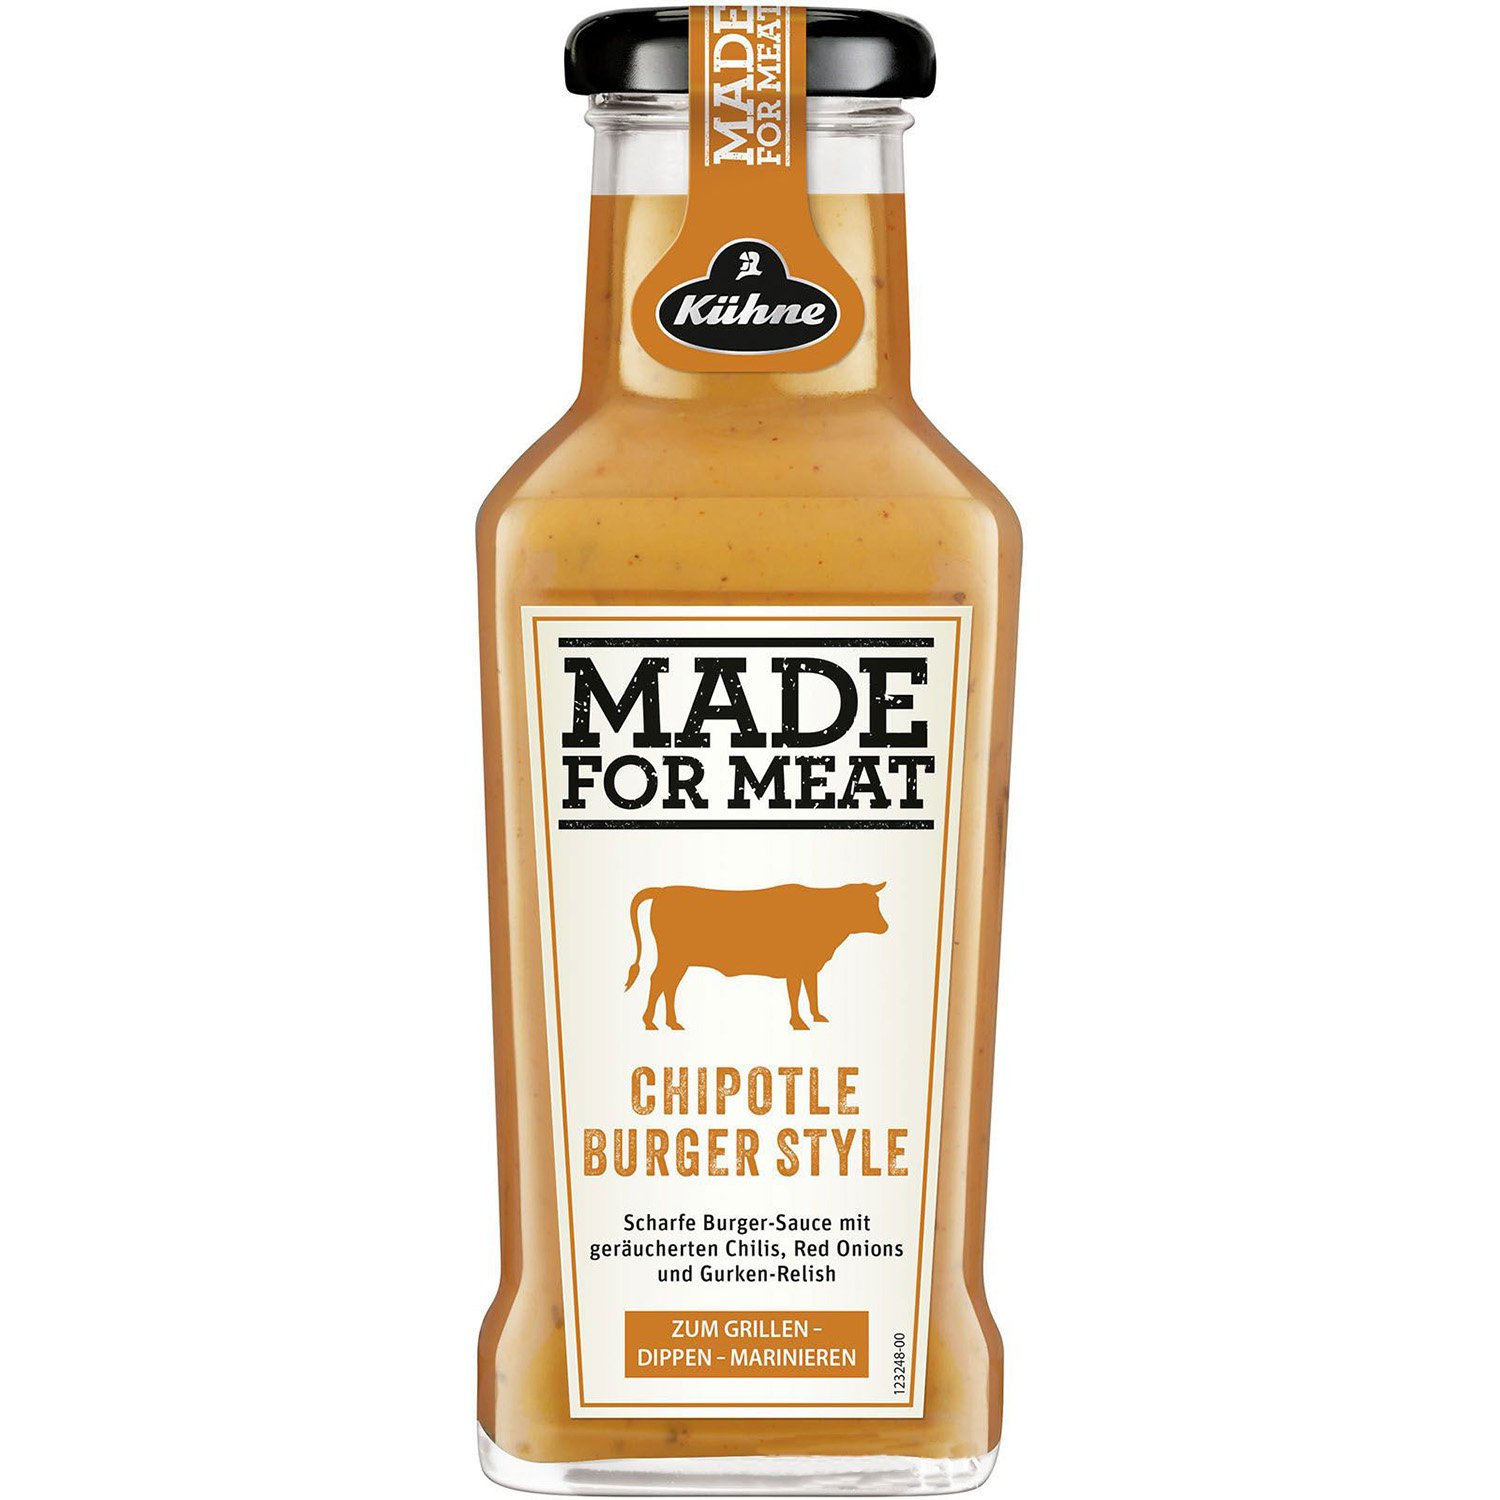 Соуc Kuhne Мade For Meat Chipotle Burger Style, 235 мл (742090) - фото 1